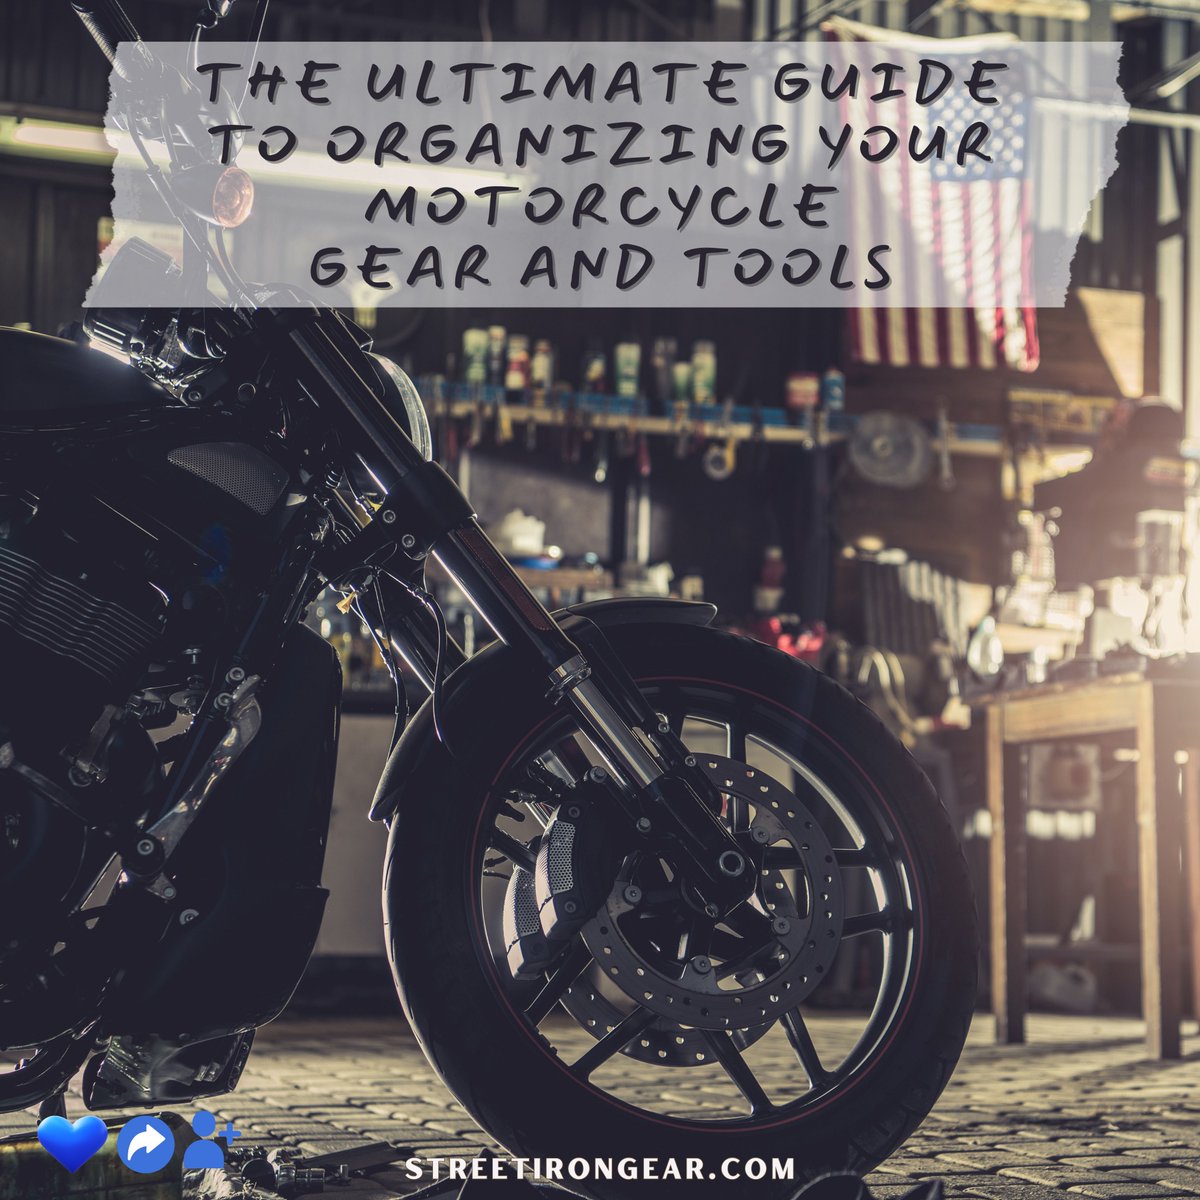 The Ultimate Guide To Organizing Your Motorcycle Gear And Tools

Read Article 👇
streetirongear.com/blogs/news/the…

#bikelife #canamroadster #motorcyclemaintenance #motorcyclegear #garageorganization #StreetIronGear